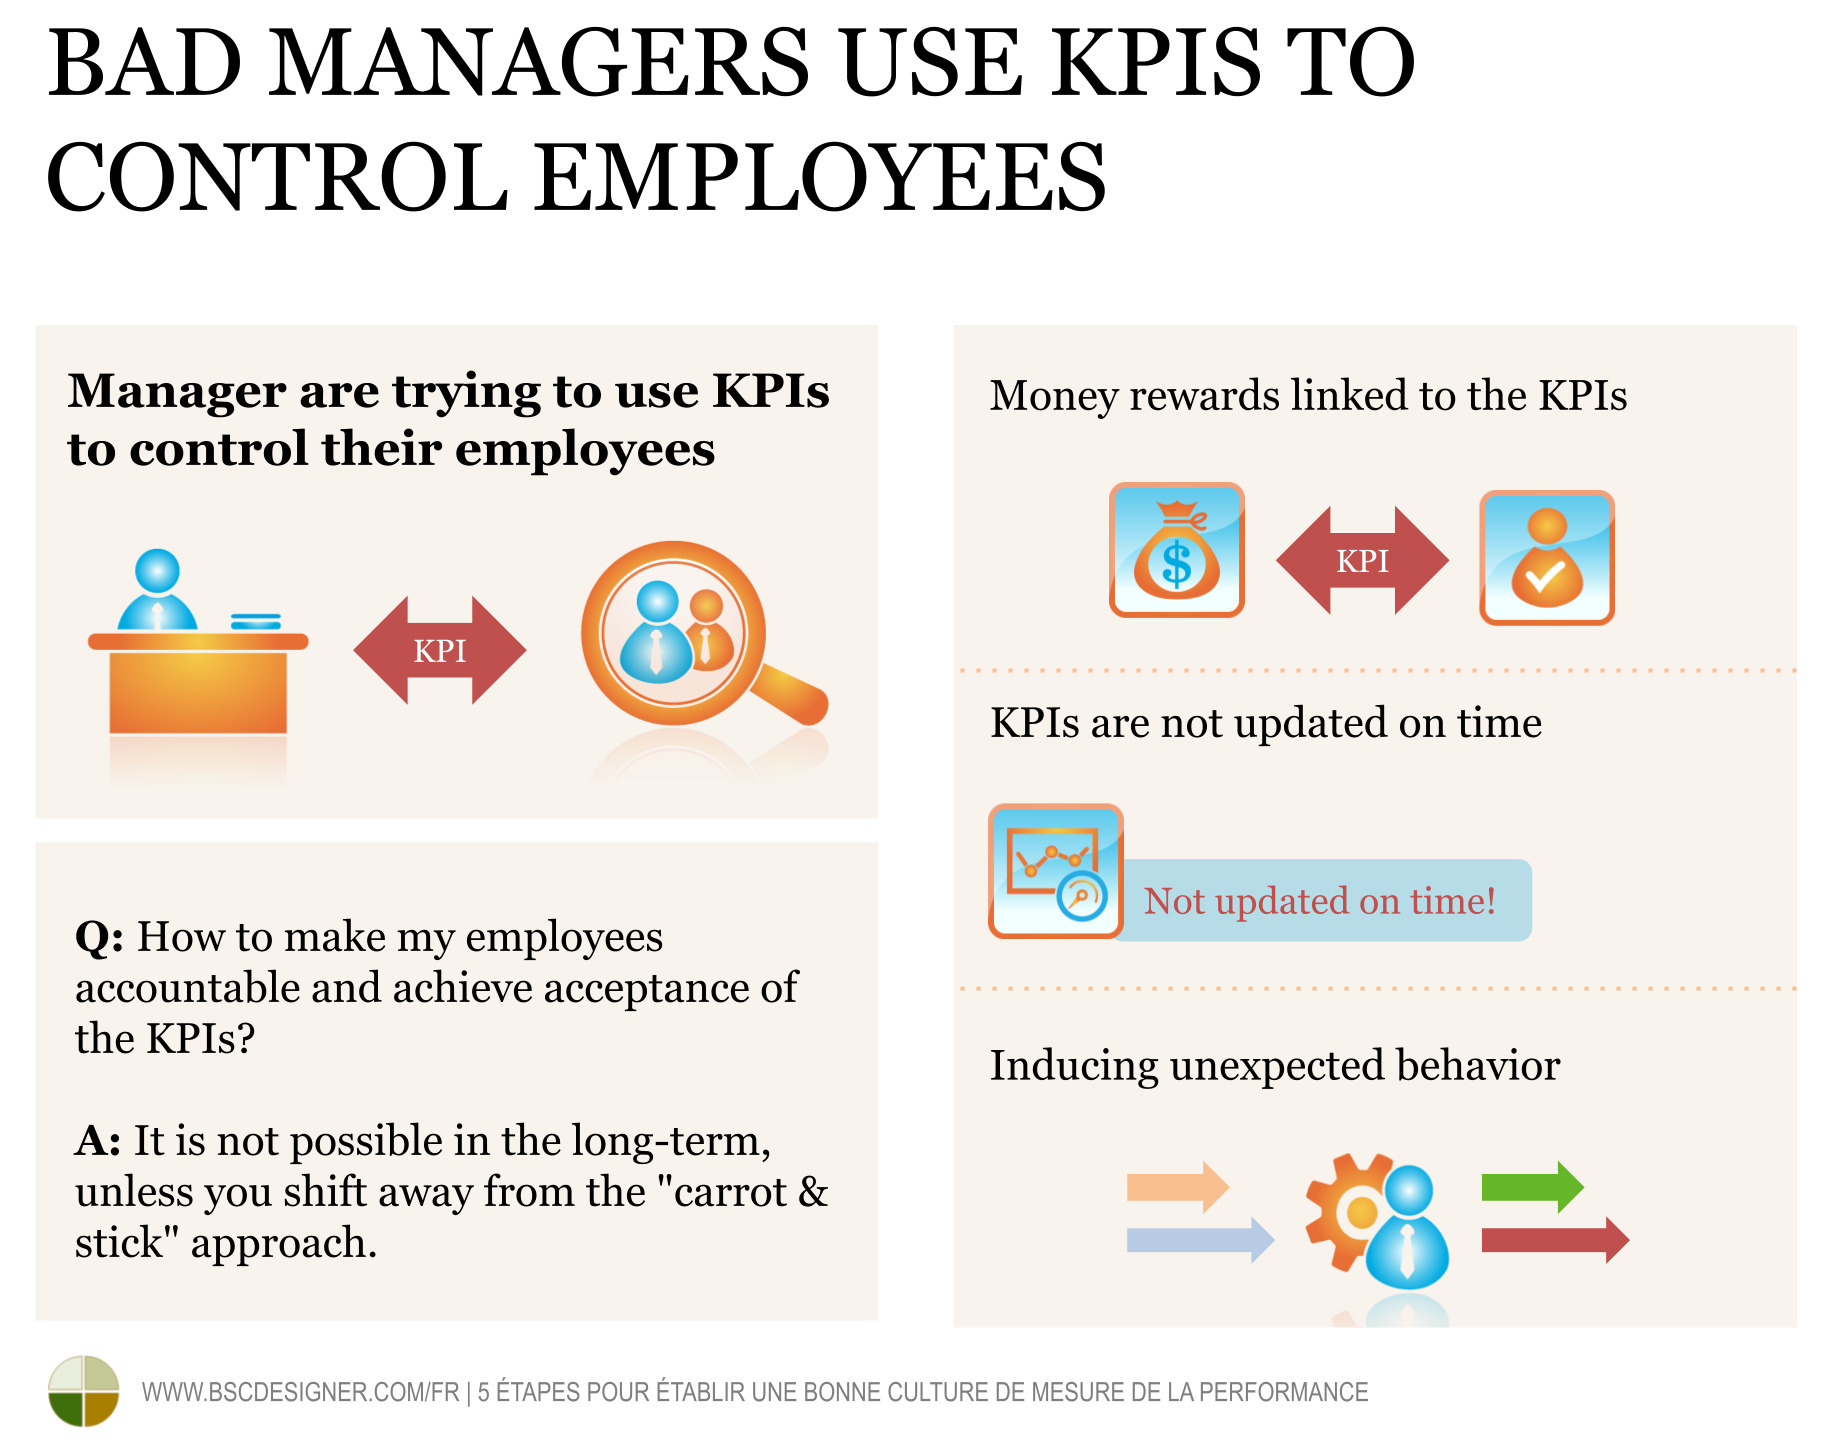 Bad managers use KPIs to control employees